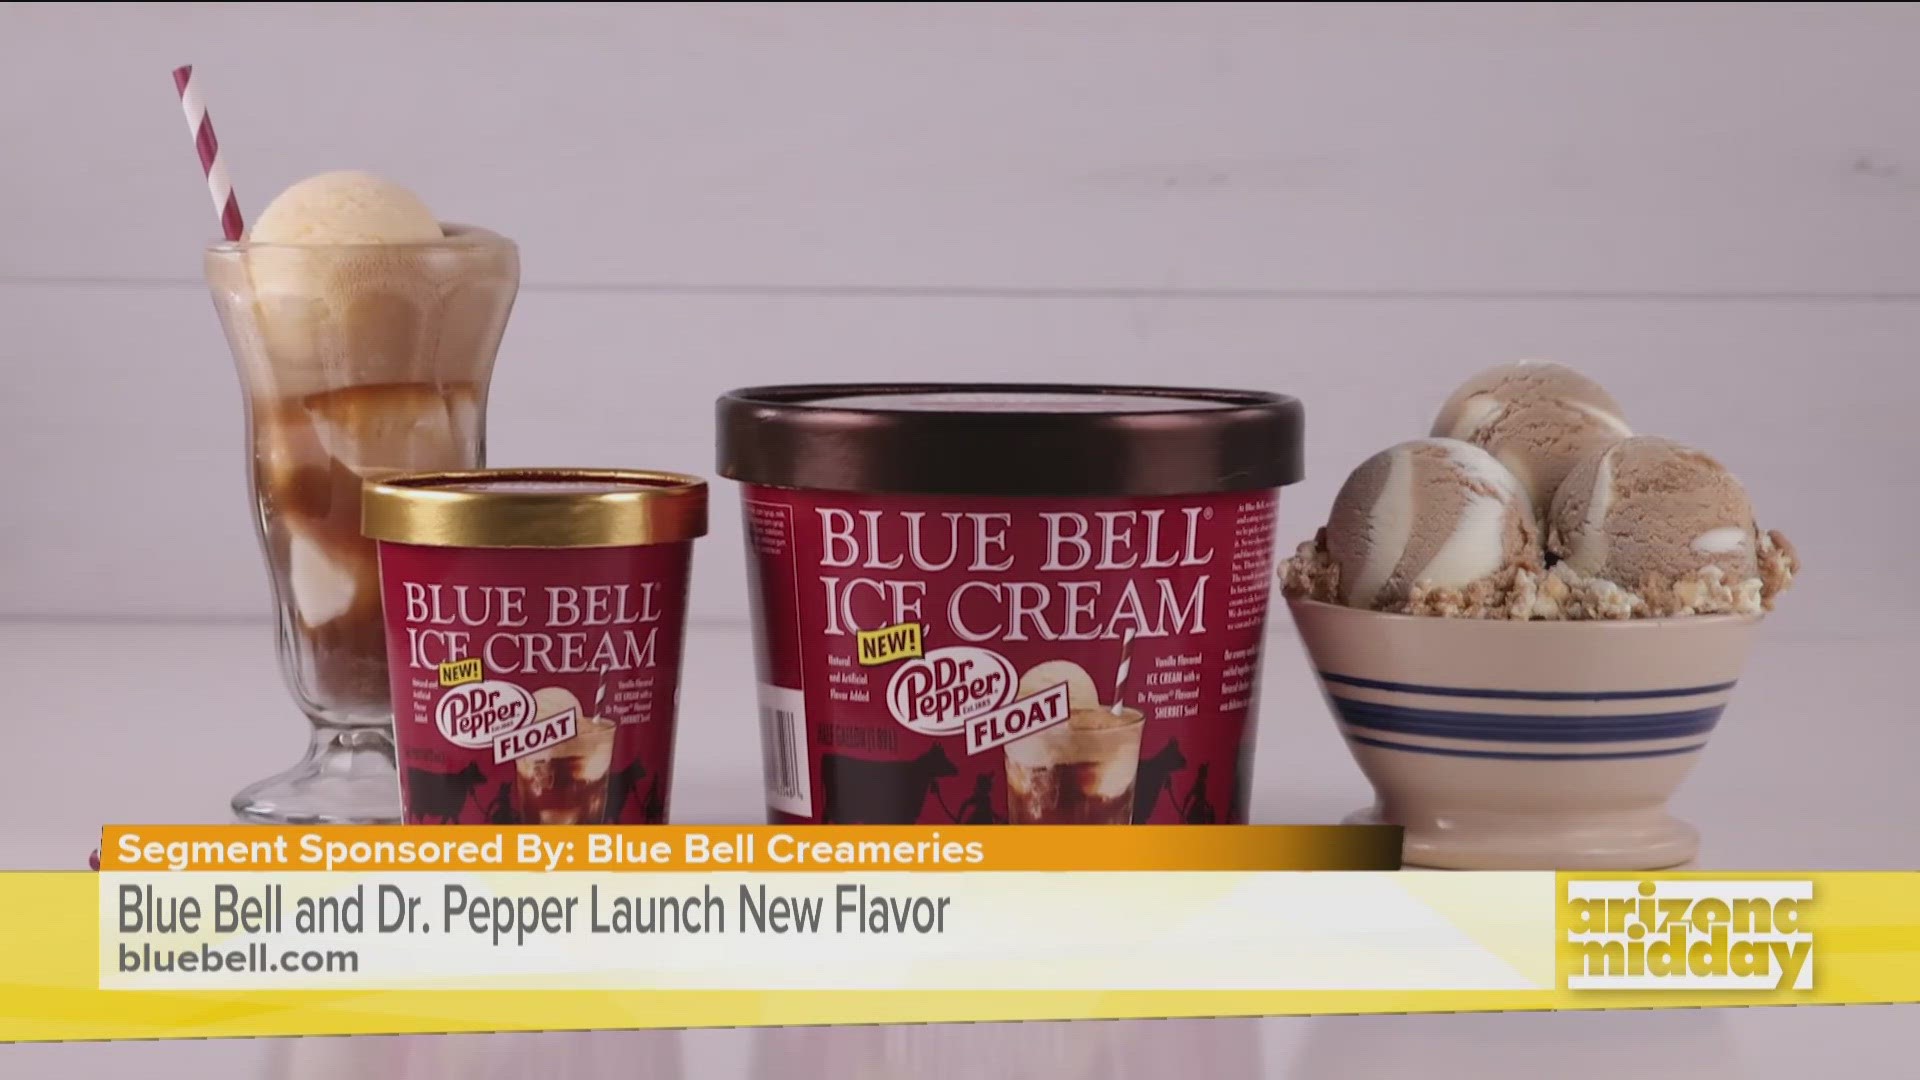 Ice cream giant Blue Bell drops a Dr. Pepper float flavored ice cream. We got a taste - see what Vanessa thinks